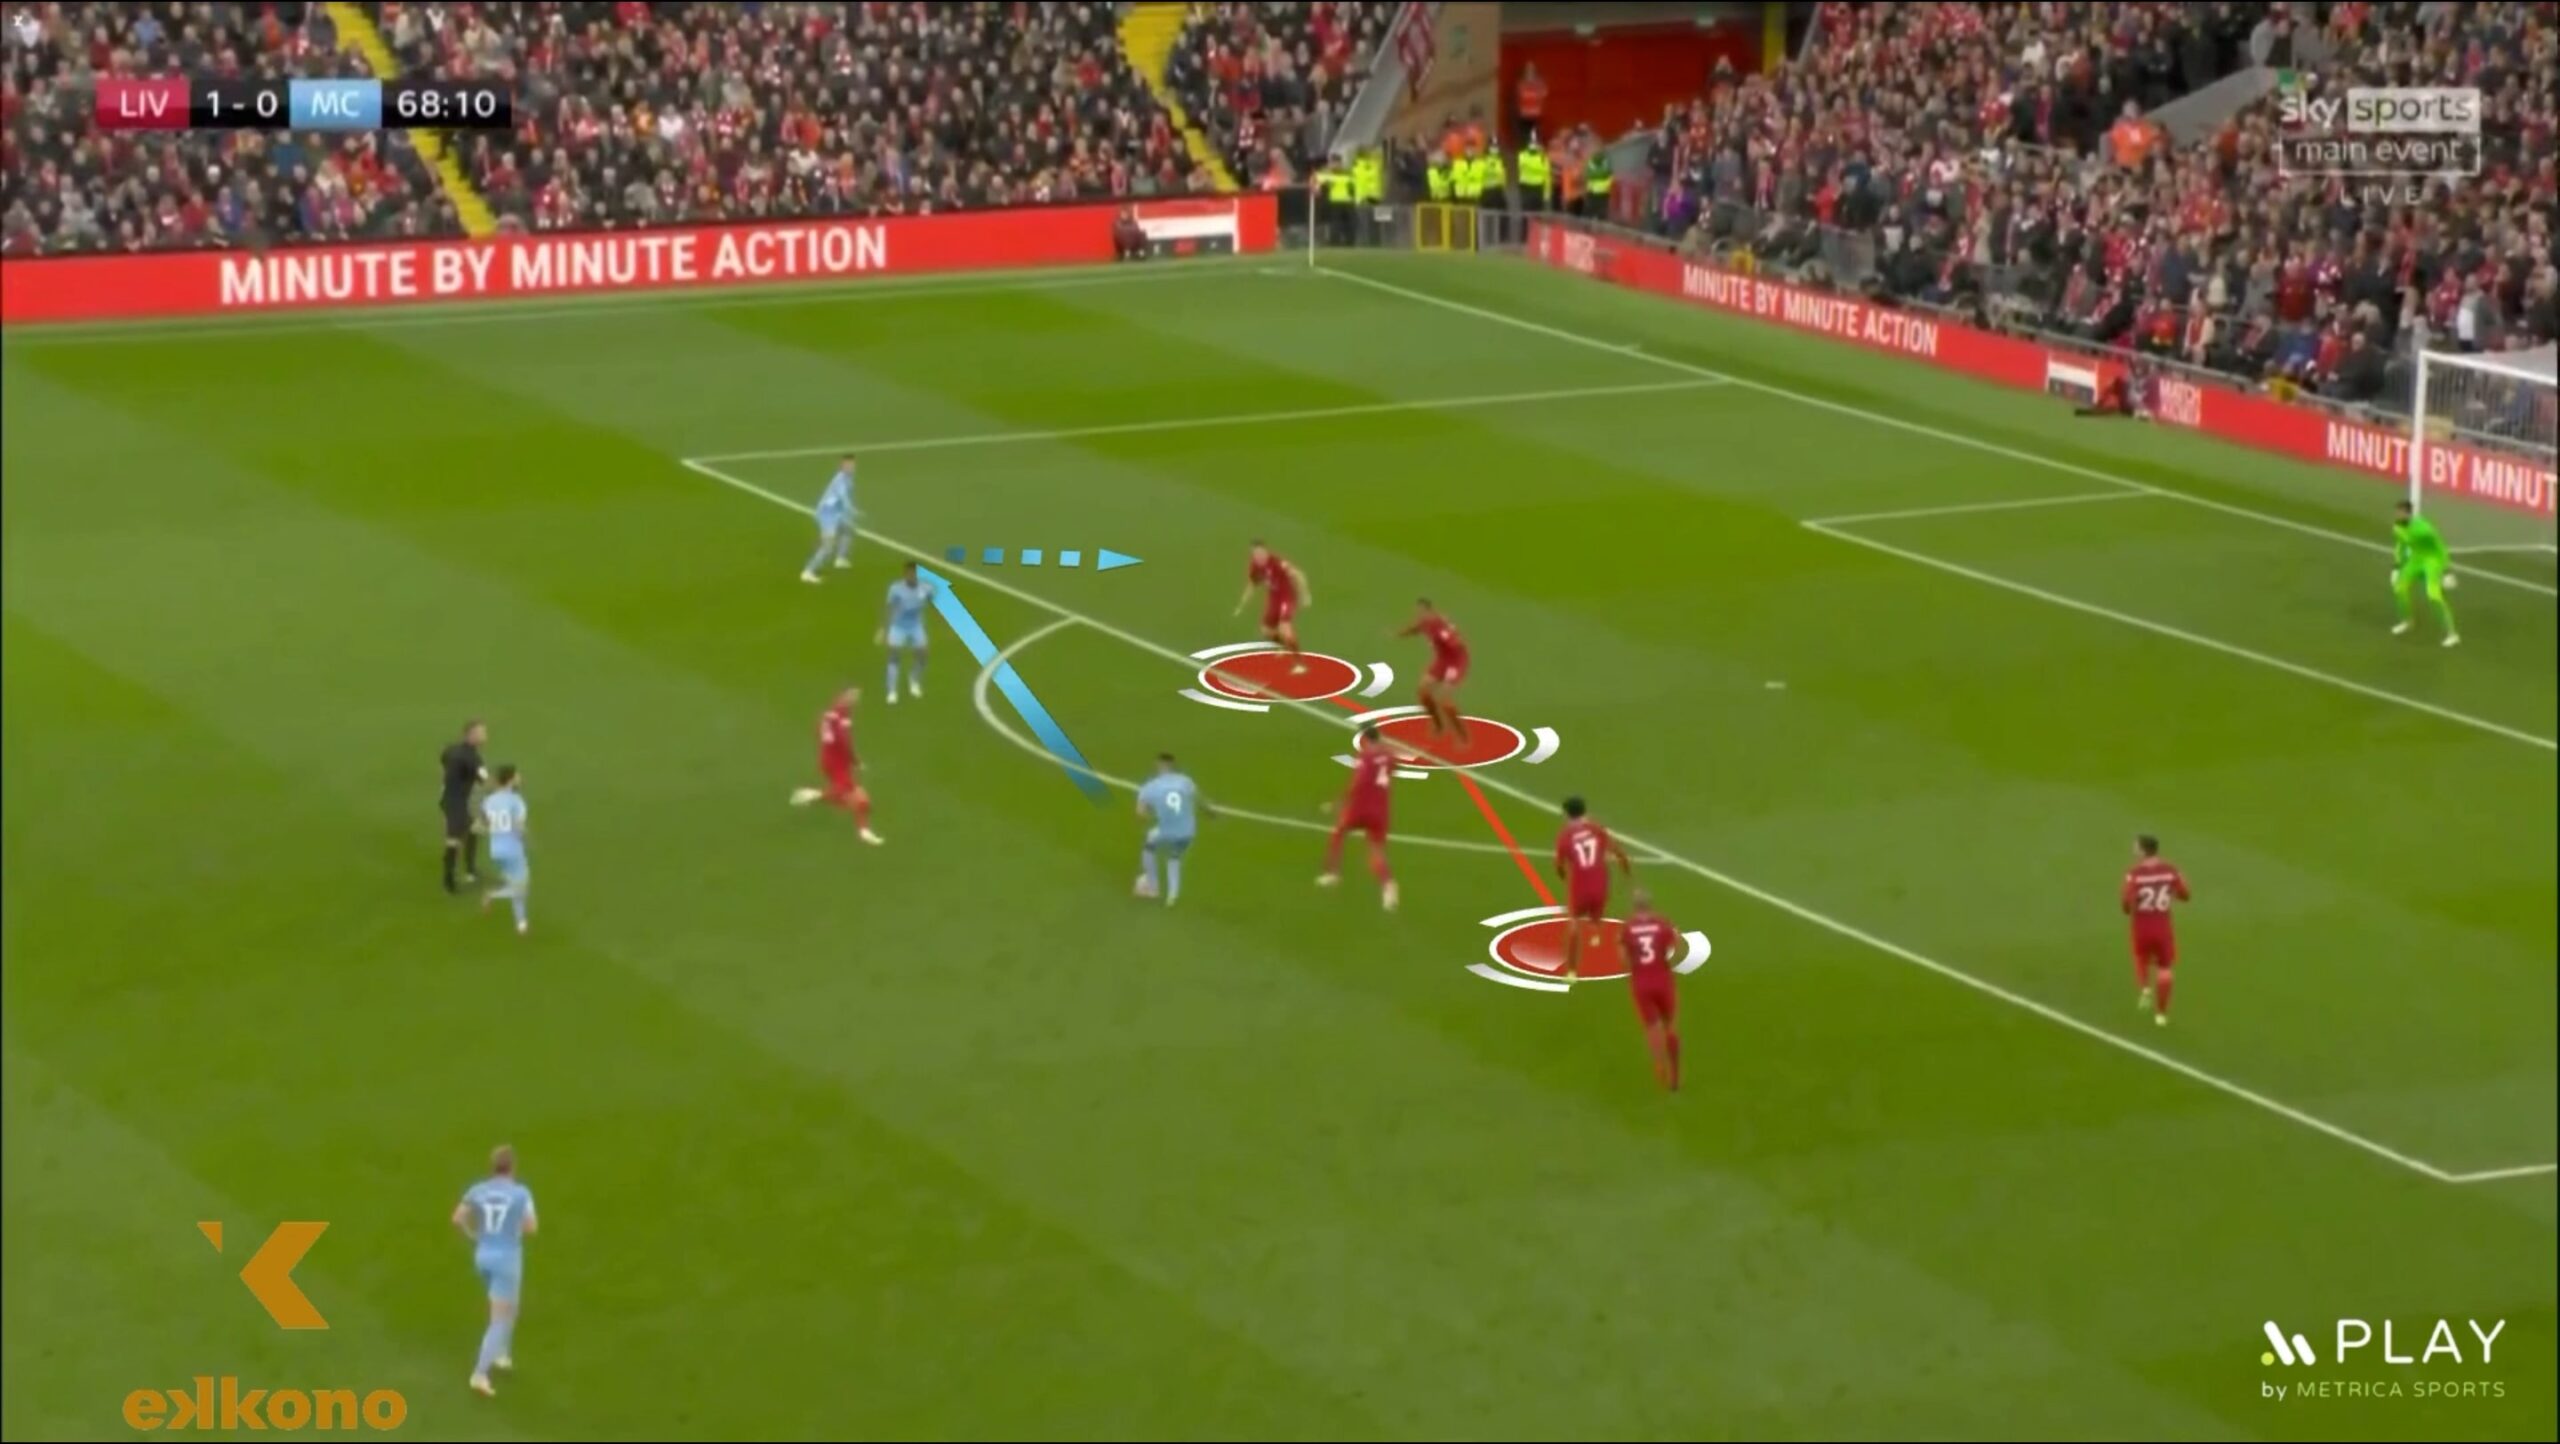 Foden (Manchester City) is at the same depth as Liverpool's defensive line, and makes a first touch to surpass and score. This is part of the secrets of a good first touch for wingers.